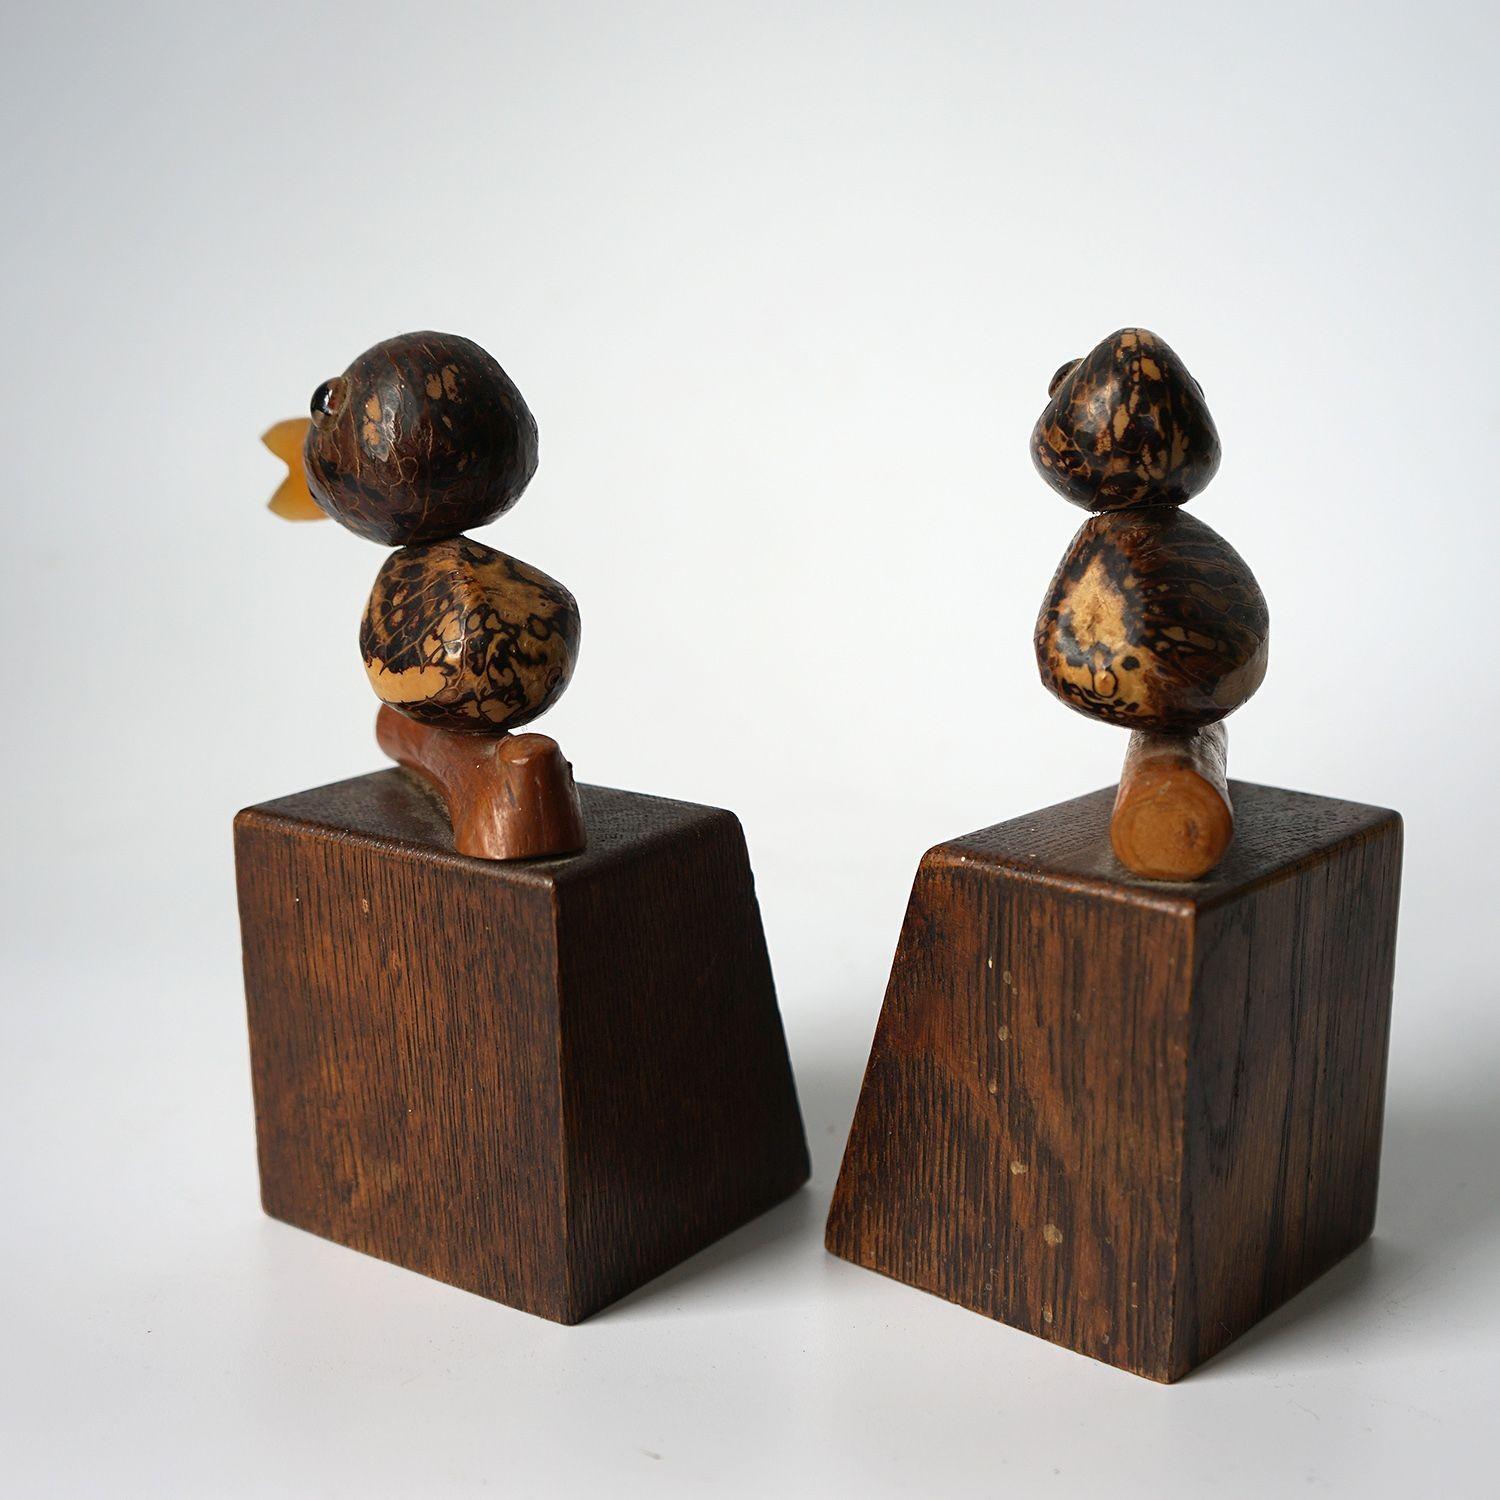 Nutwood Yz Nut Bird Bookends by Henry Howell and Co. 1920's